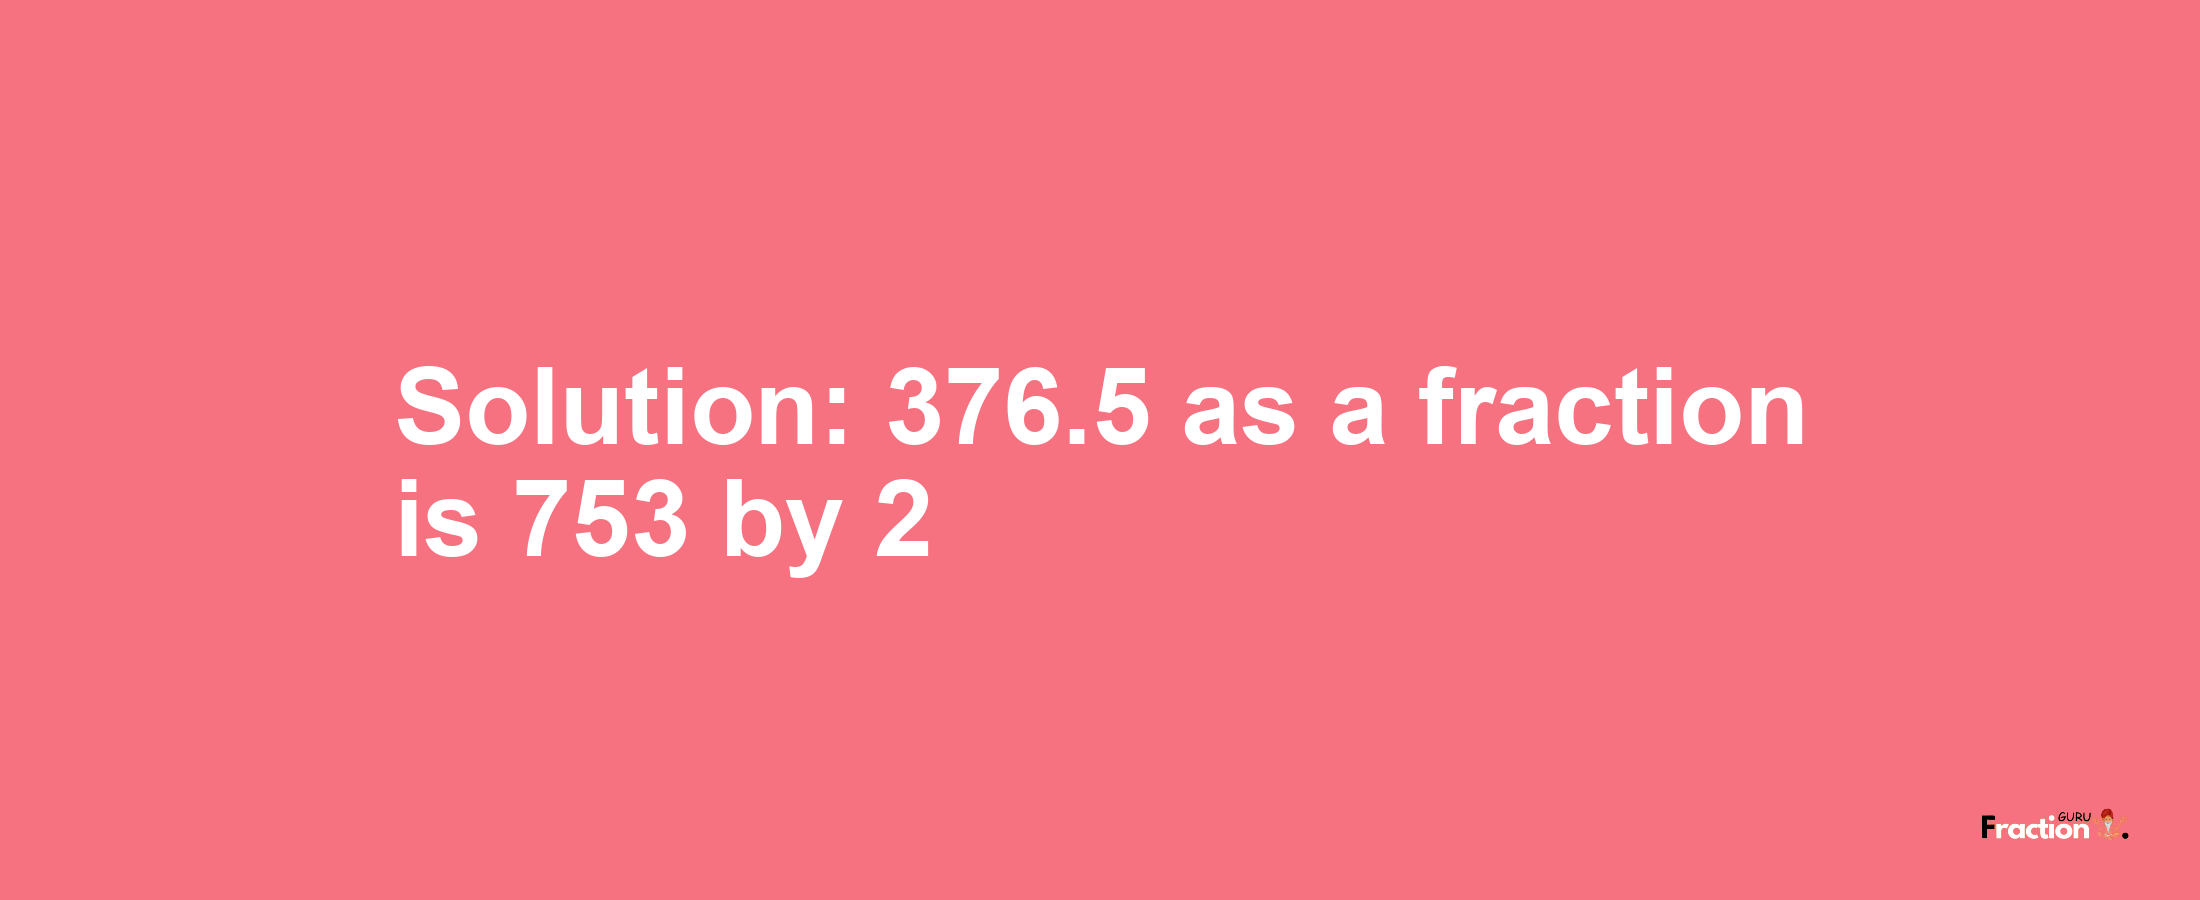 Solution:376.5 as a fraction is 753/2